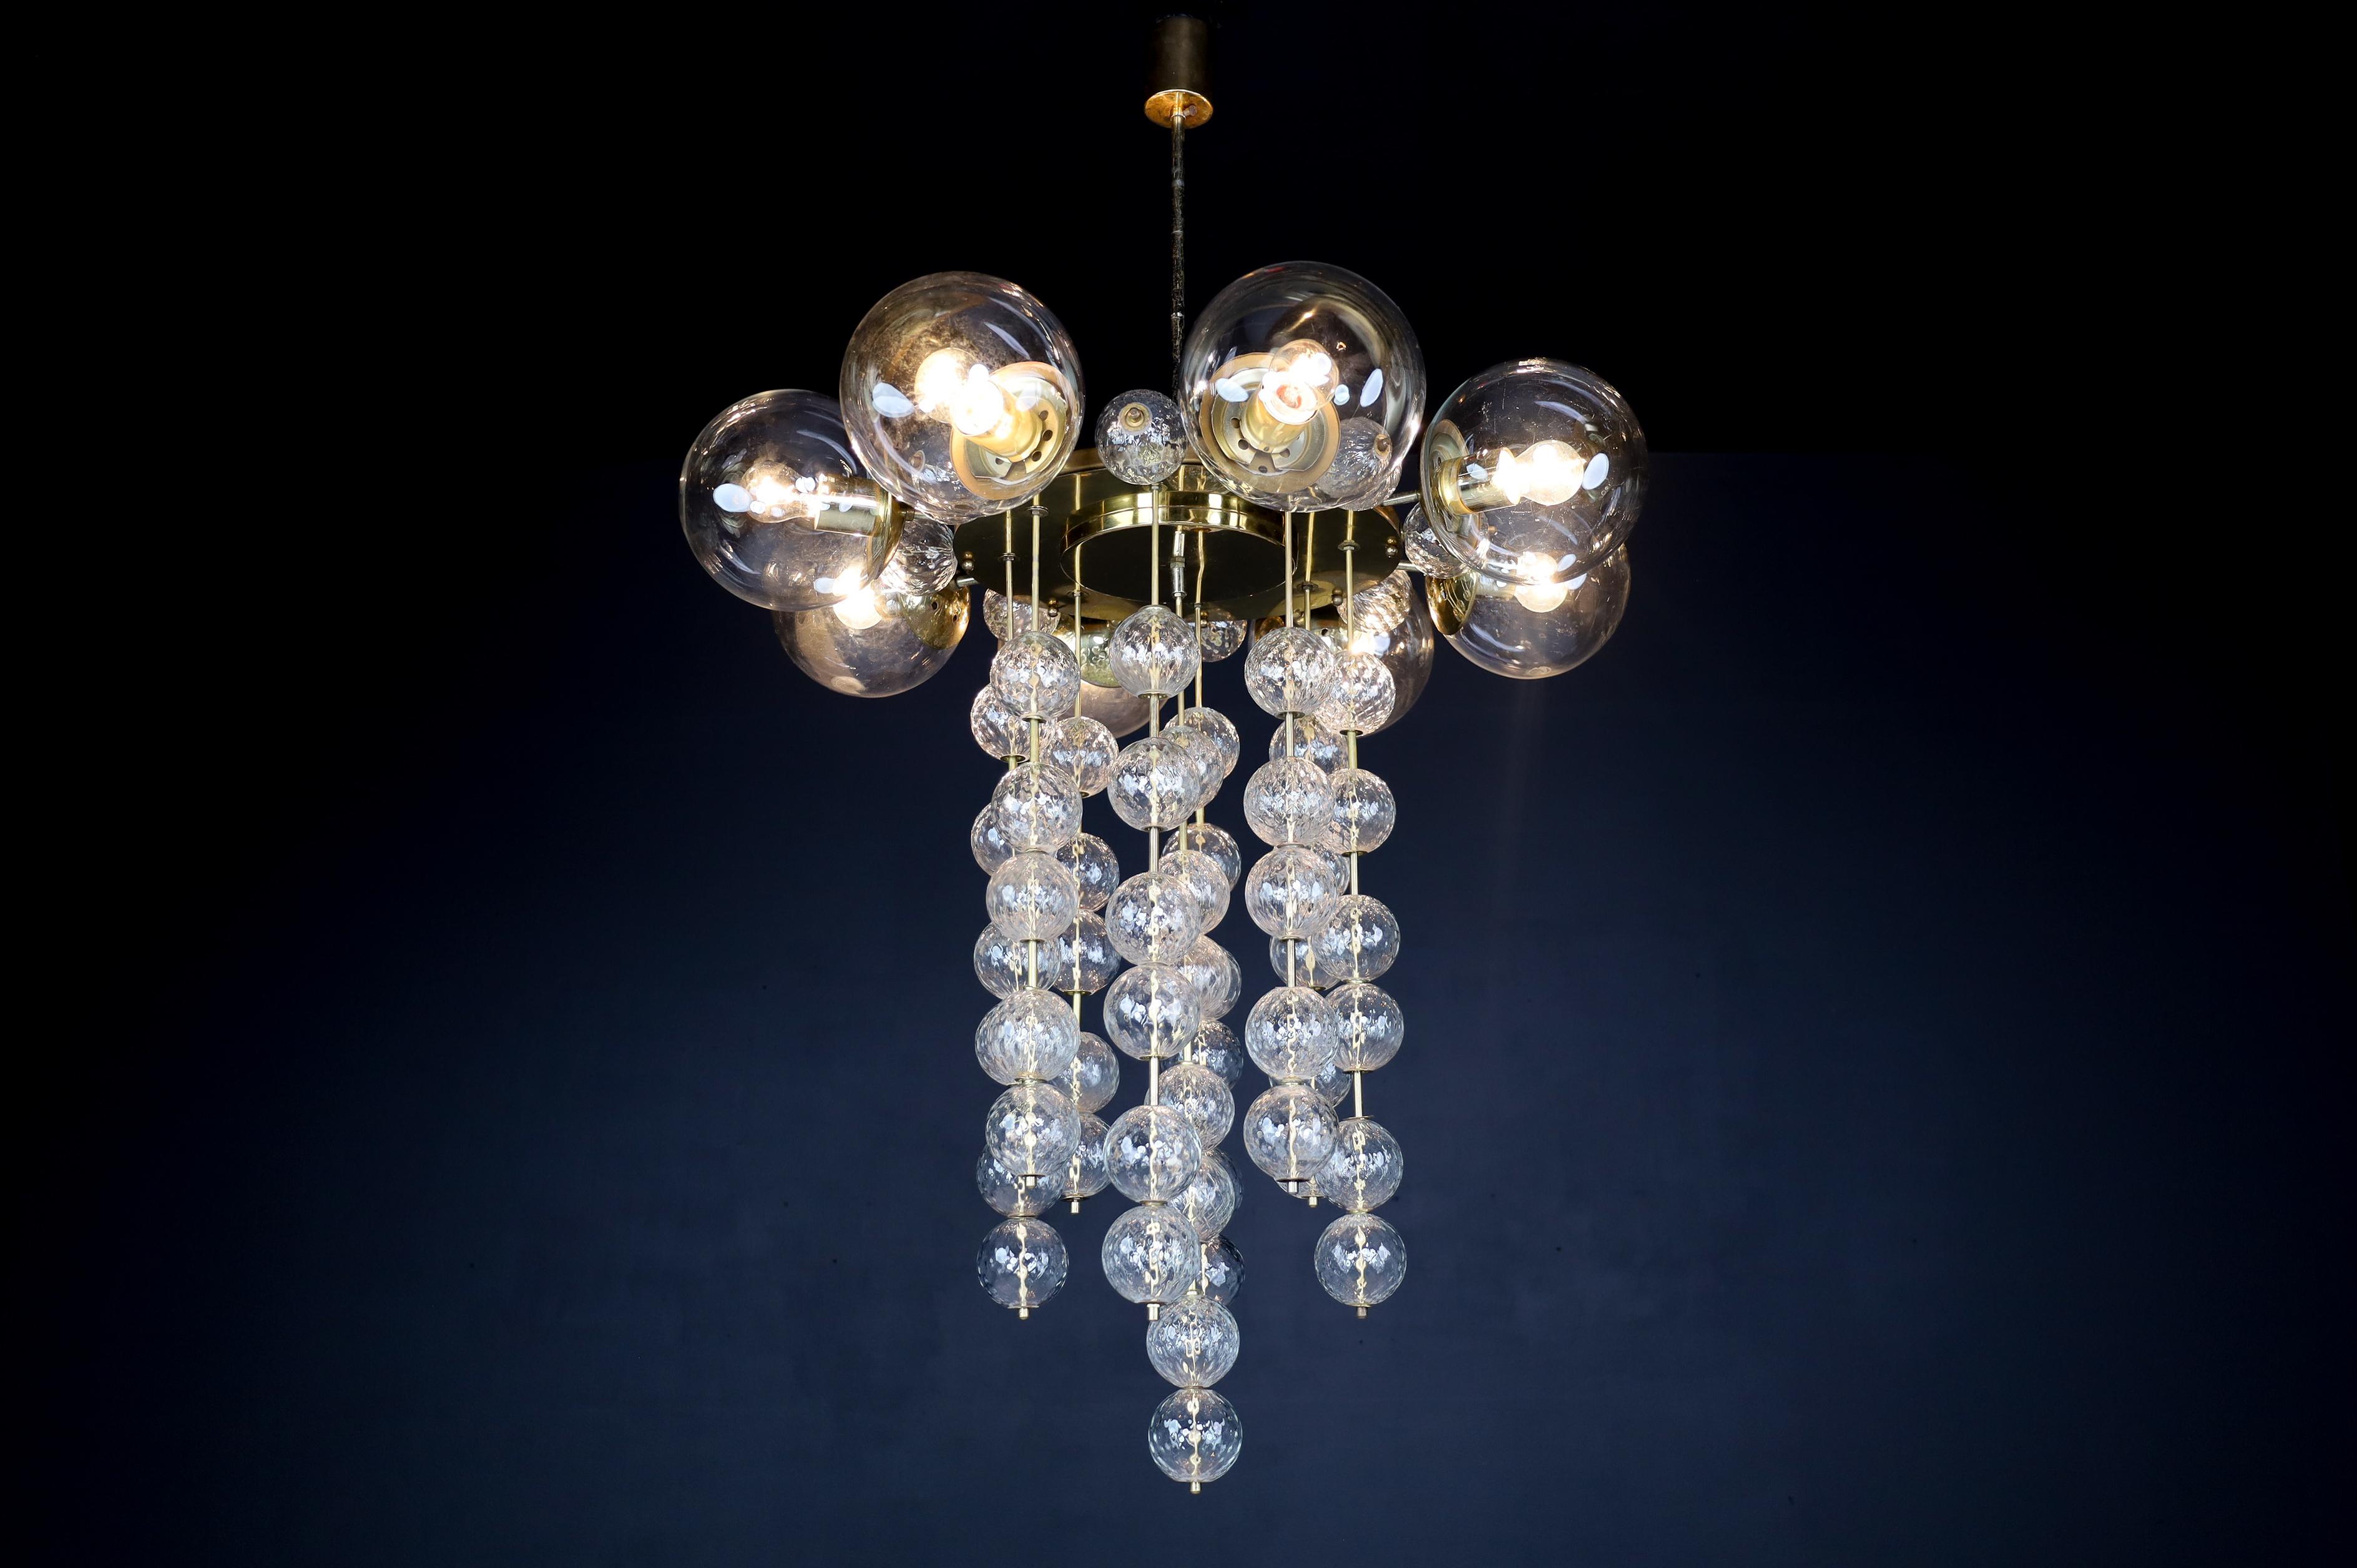 Grand Chandelier with Brass Fixture and Hand-blowed Glass Globes, 1960s For Sale 13